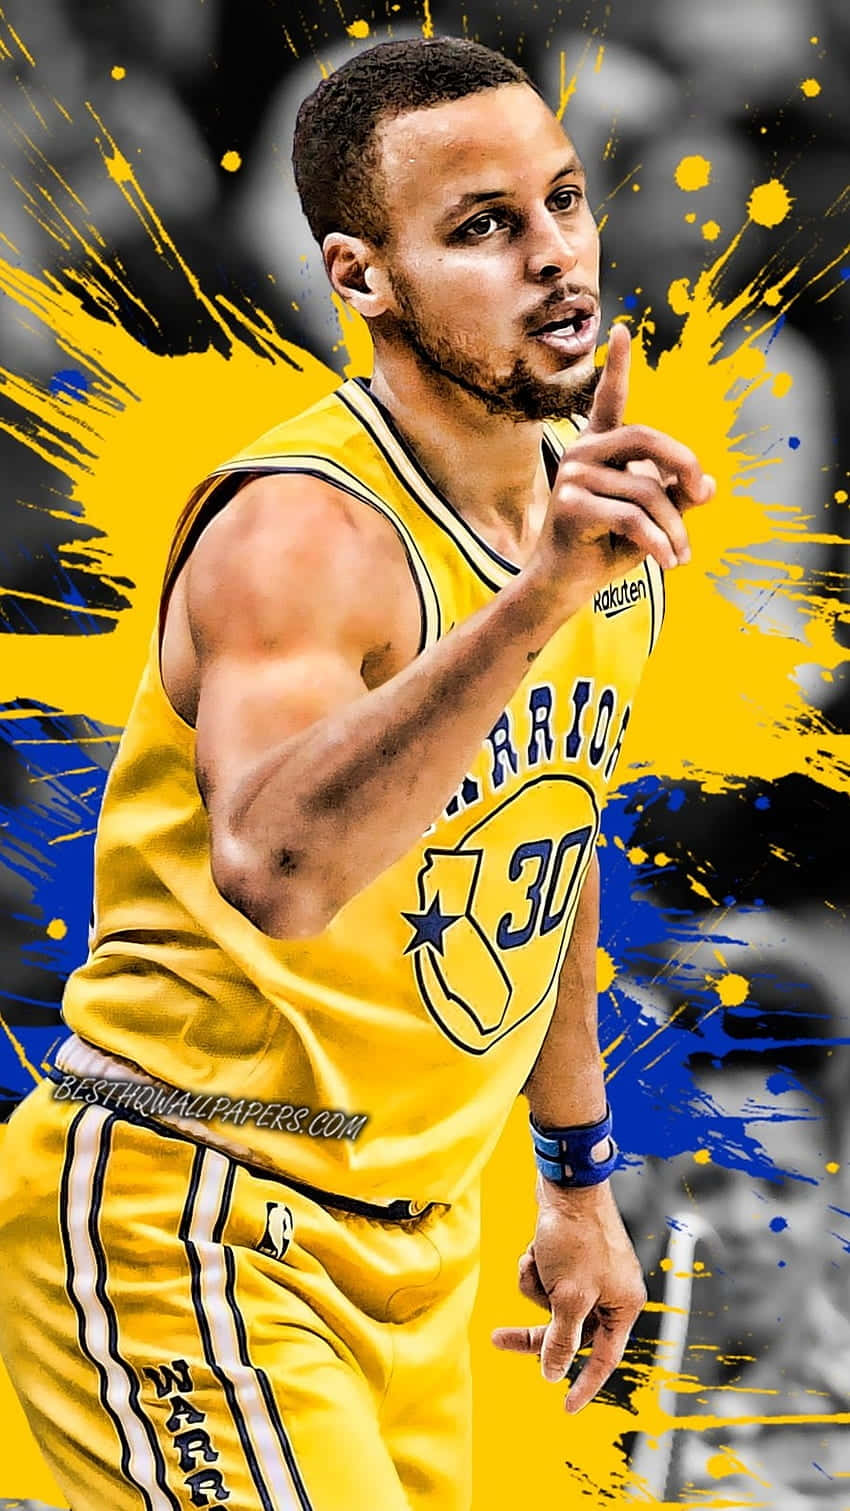 750x1334 Stephen Curry iPhone 6 iPhone 6S iPhone 7 HD 4k Wallpapers  Images Backgrounds Photos and Pictures